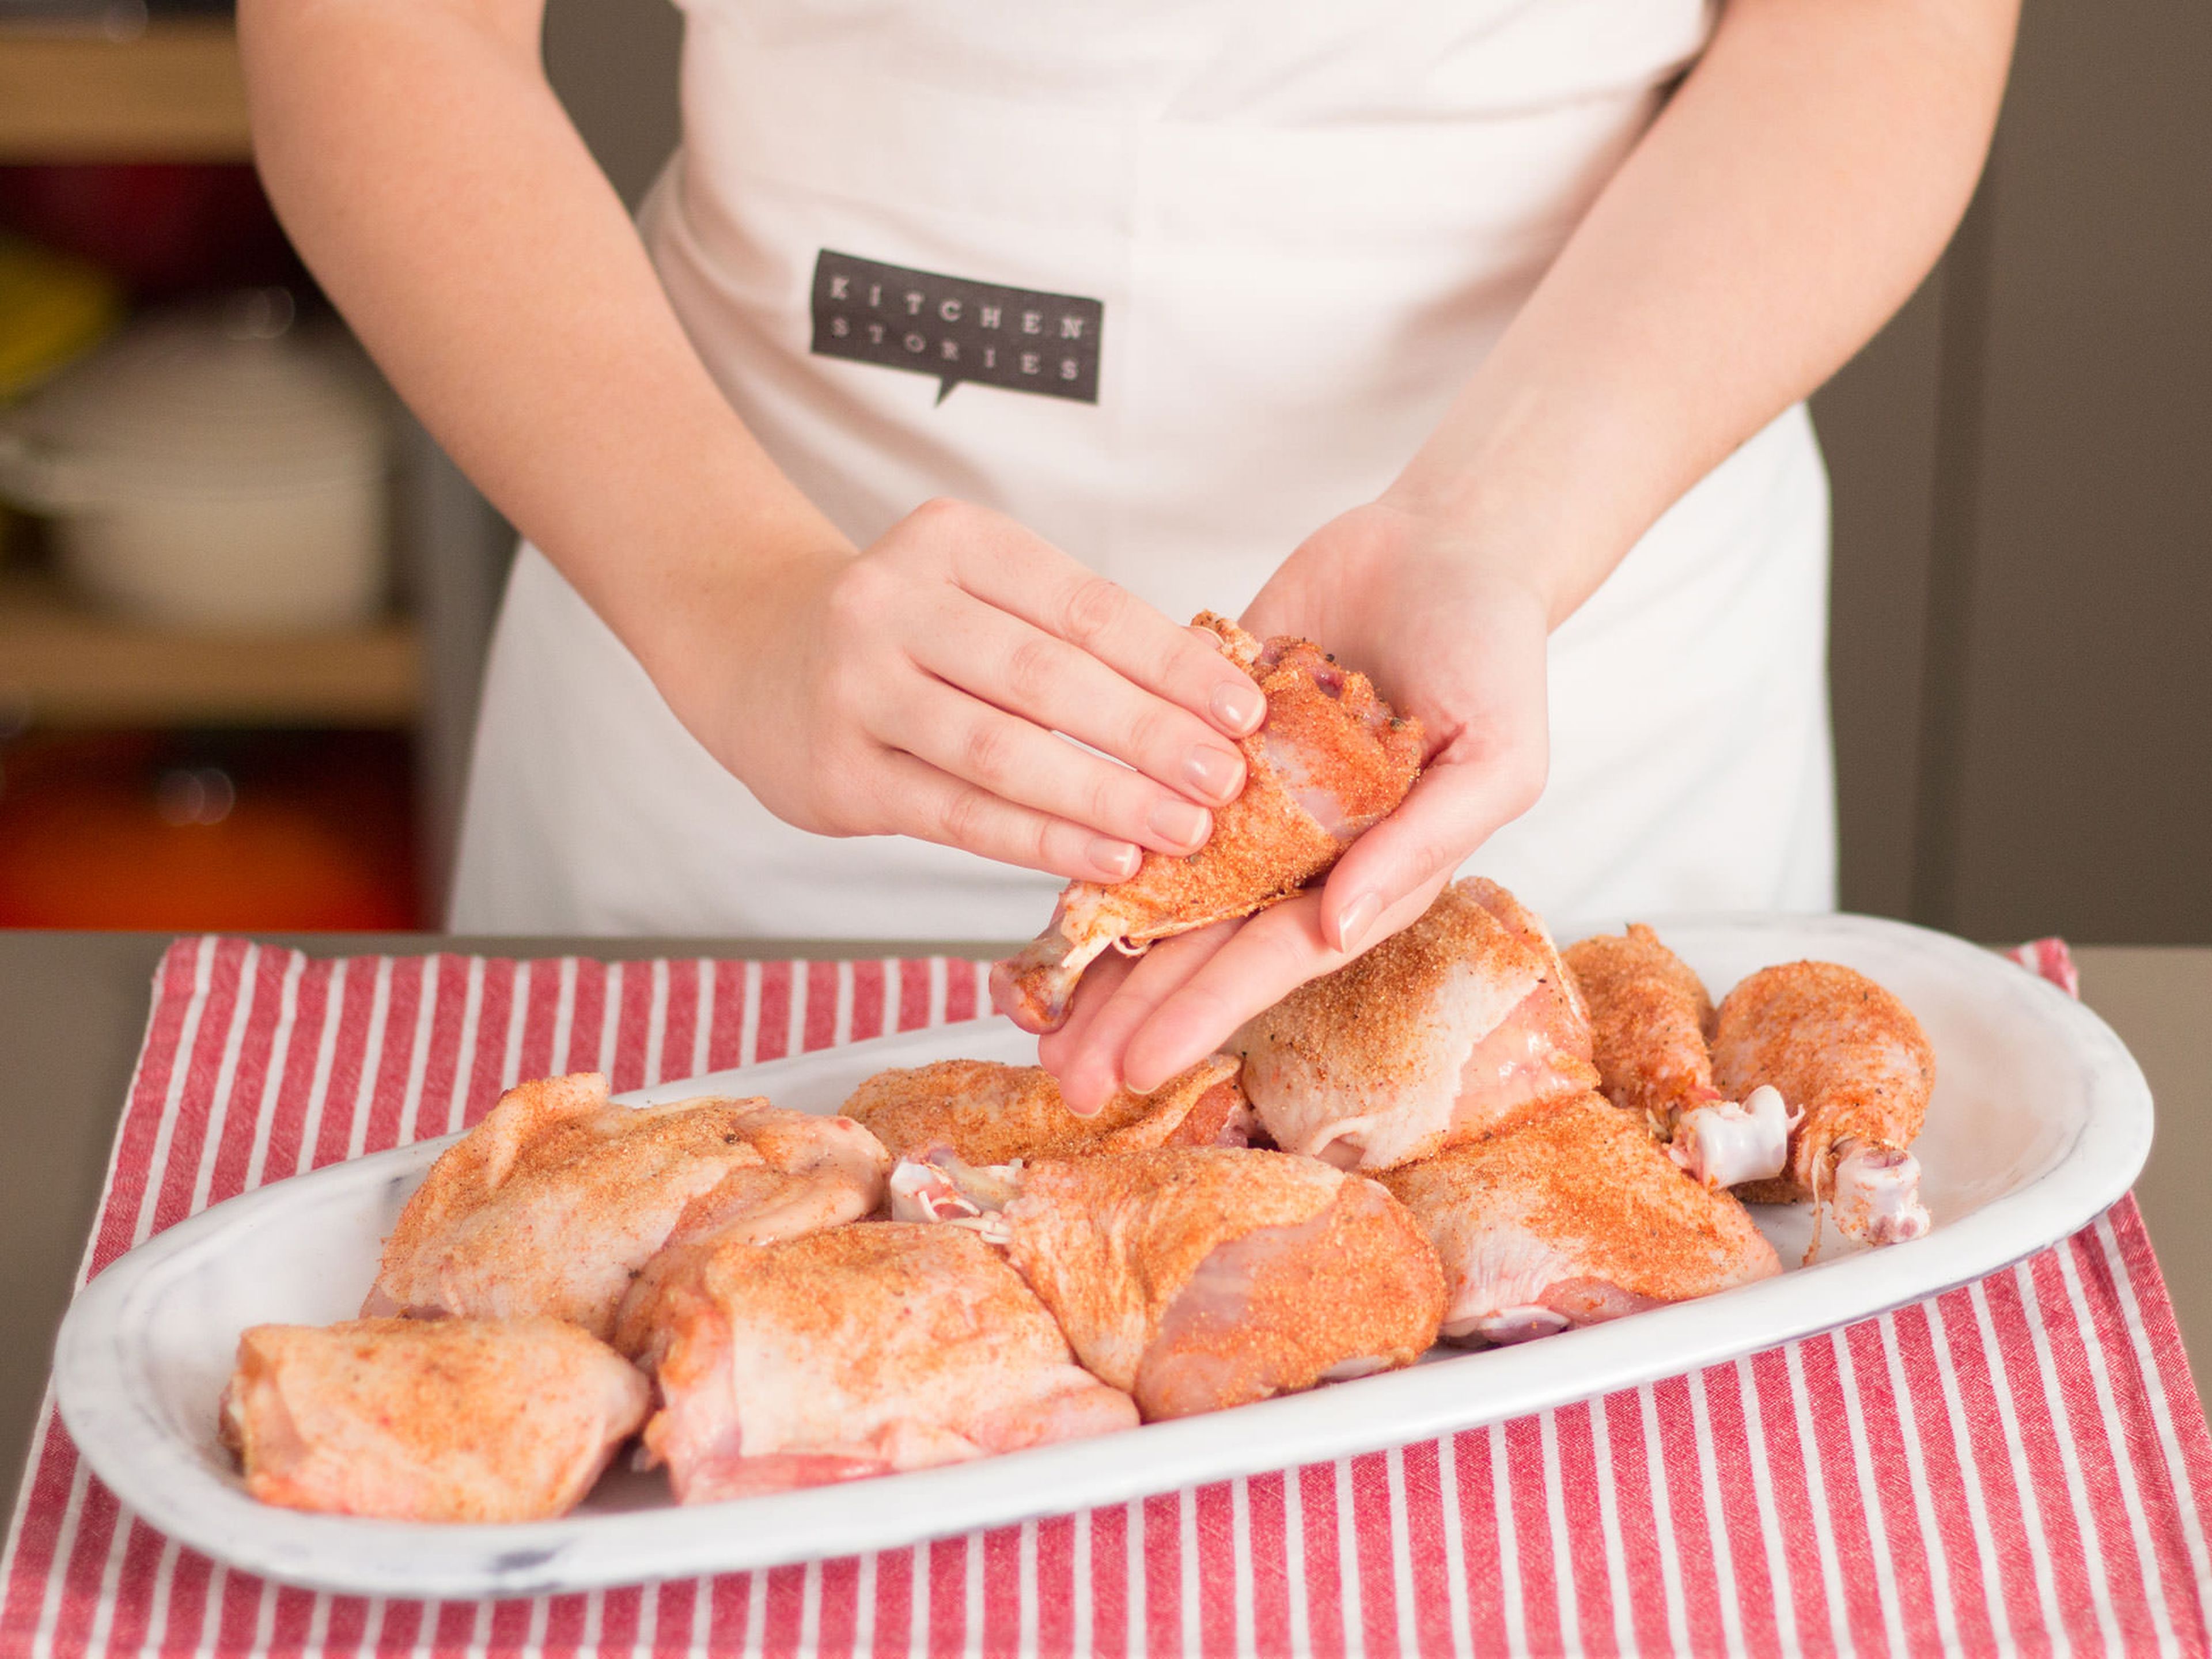 Carefully cut chicken legs in half at the joint. Rub them generously with spice rub, setting any excess spice rub aside.